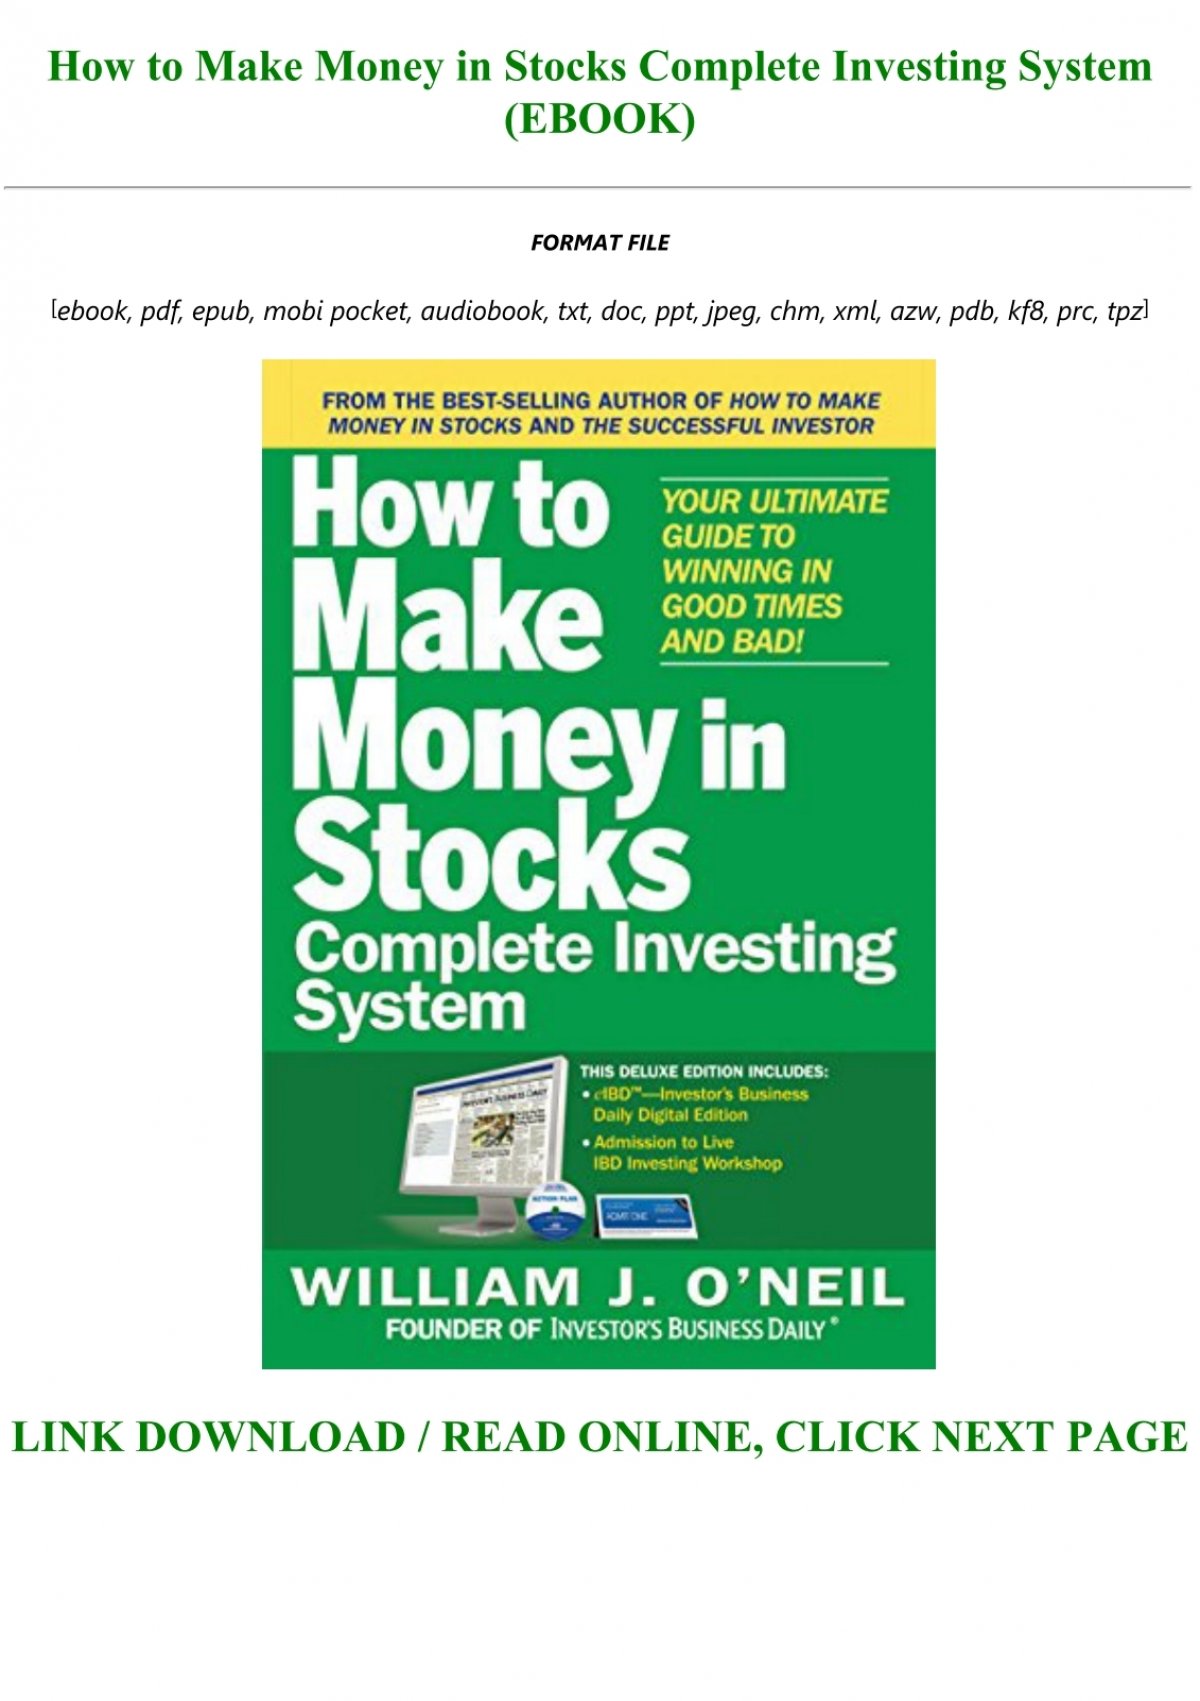 is it worth investing in amazon stocks? - Money|Stocks|Stock|System|Book|Market|Trading|Books|Guide|Times|Day|Der|Download|Investors|Edition|Investor|Description|Pdf|Format|Epub|O'neil|Die|Strategies|Strategy|Mit|Investing|Dummies|Risk|Gains|Business|Man|Investment|Years|World|Wie|Action|Charts|William|Dad|Plan|Good Times|Stock Market|Ultimate Guide|Mobi Format|Full Book|Day Trading|National Bestseller|Successful Investing|Rich Dad|Seven-Step Process|Maximizing Gains|Major Study|American Association|Individual Investors|Mutual Funds|Book Description|Download Book Description|Handbuch Des|Stock Market Winners|12-Year Study|Leading Investment Strategies|Top-Performing Strategy|System-You Get|Easy Steps|Daily Resource|Big Winners|Market Rally|Big Losses|Market Downturn|Canslim Method